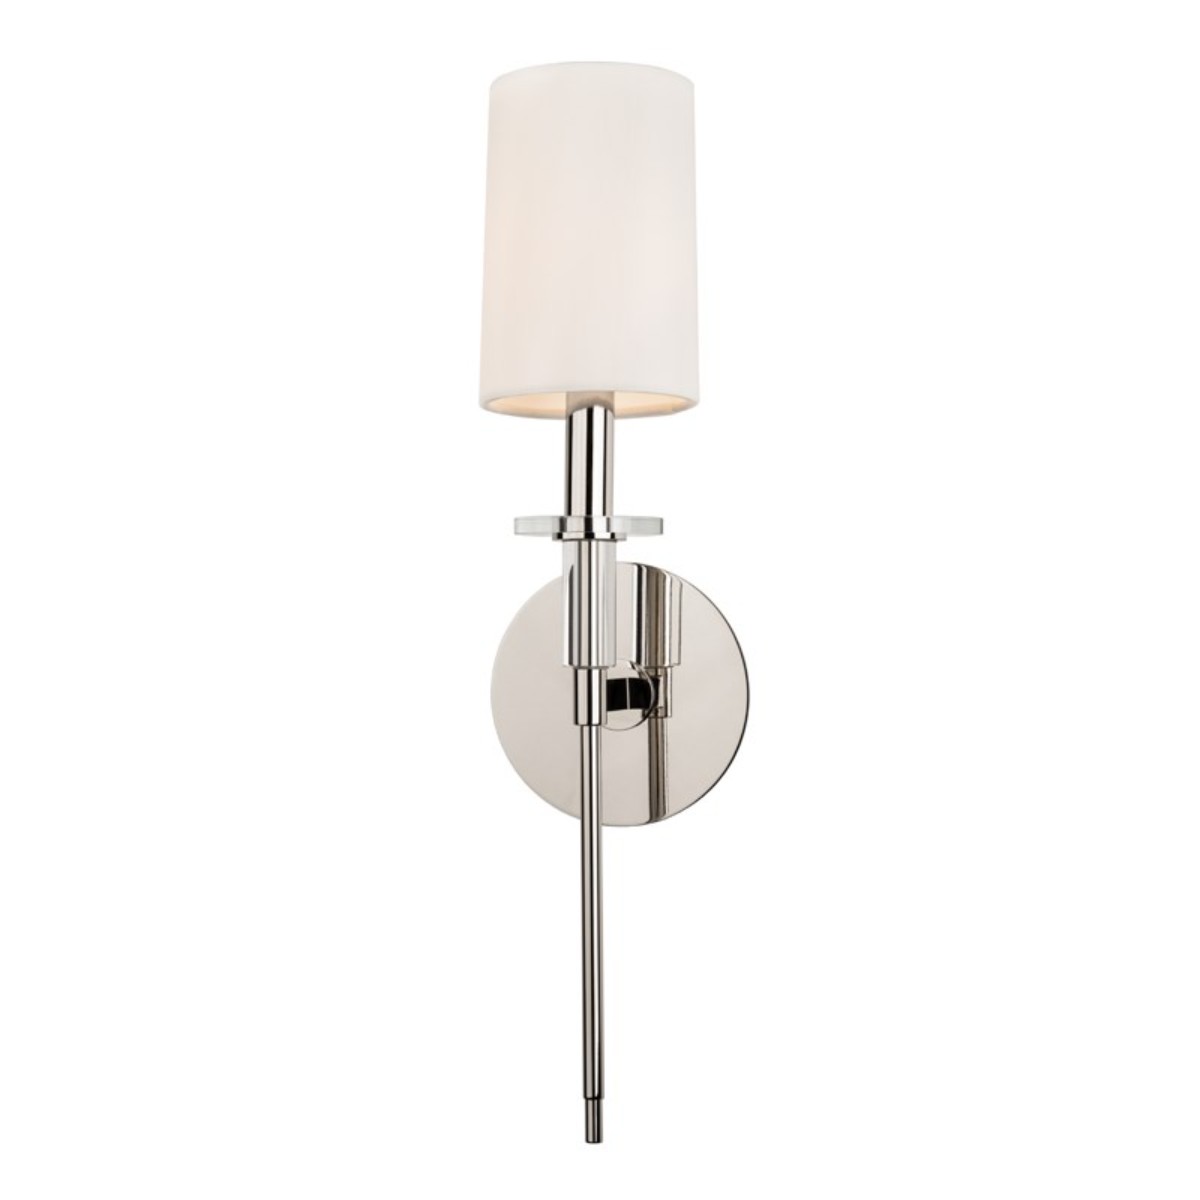 Hudson Valley | Amherst Wall Light | Polished Nickel